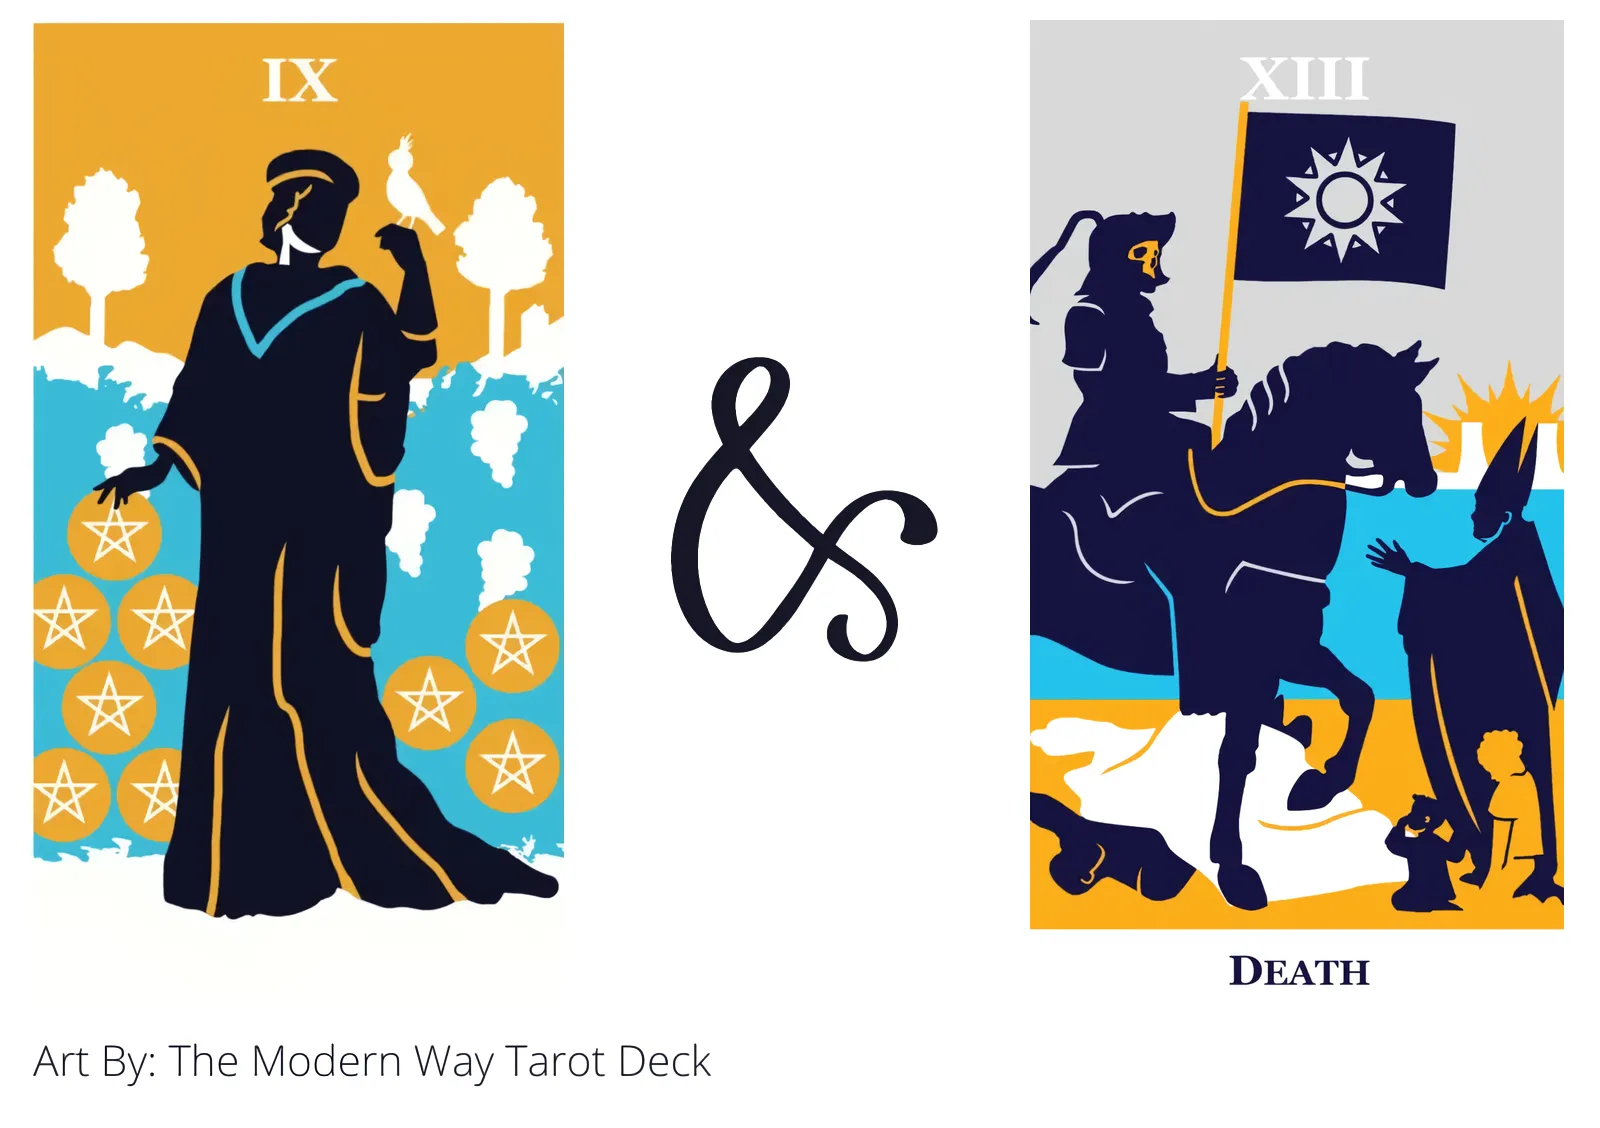 nine of pentacles and death tarot cards together